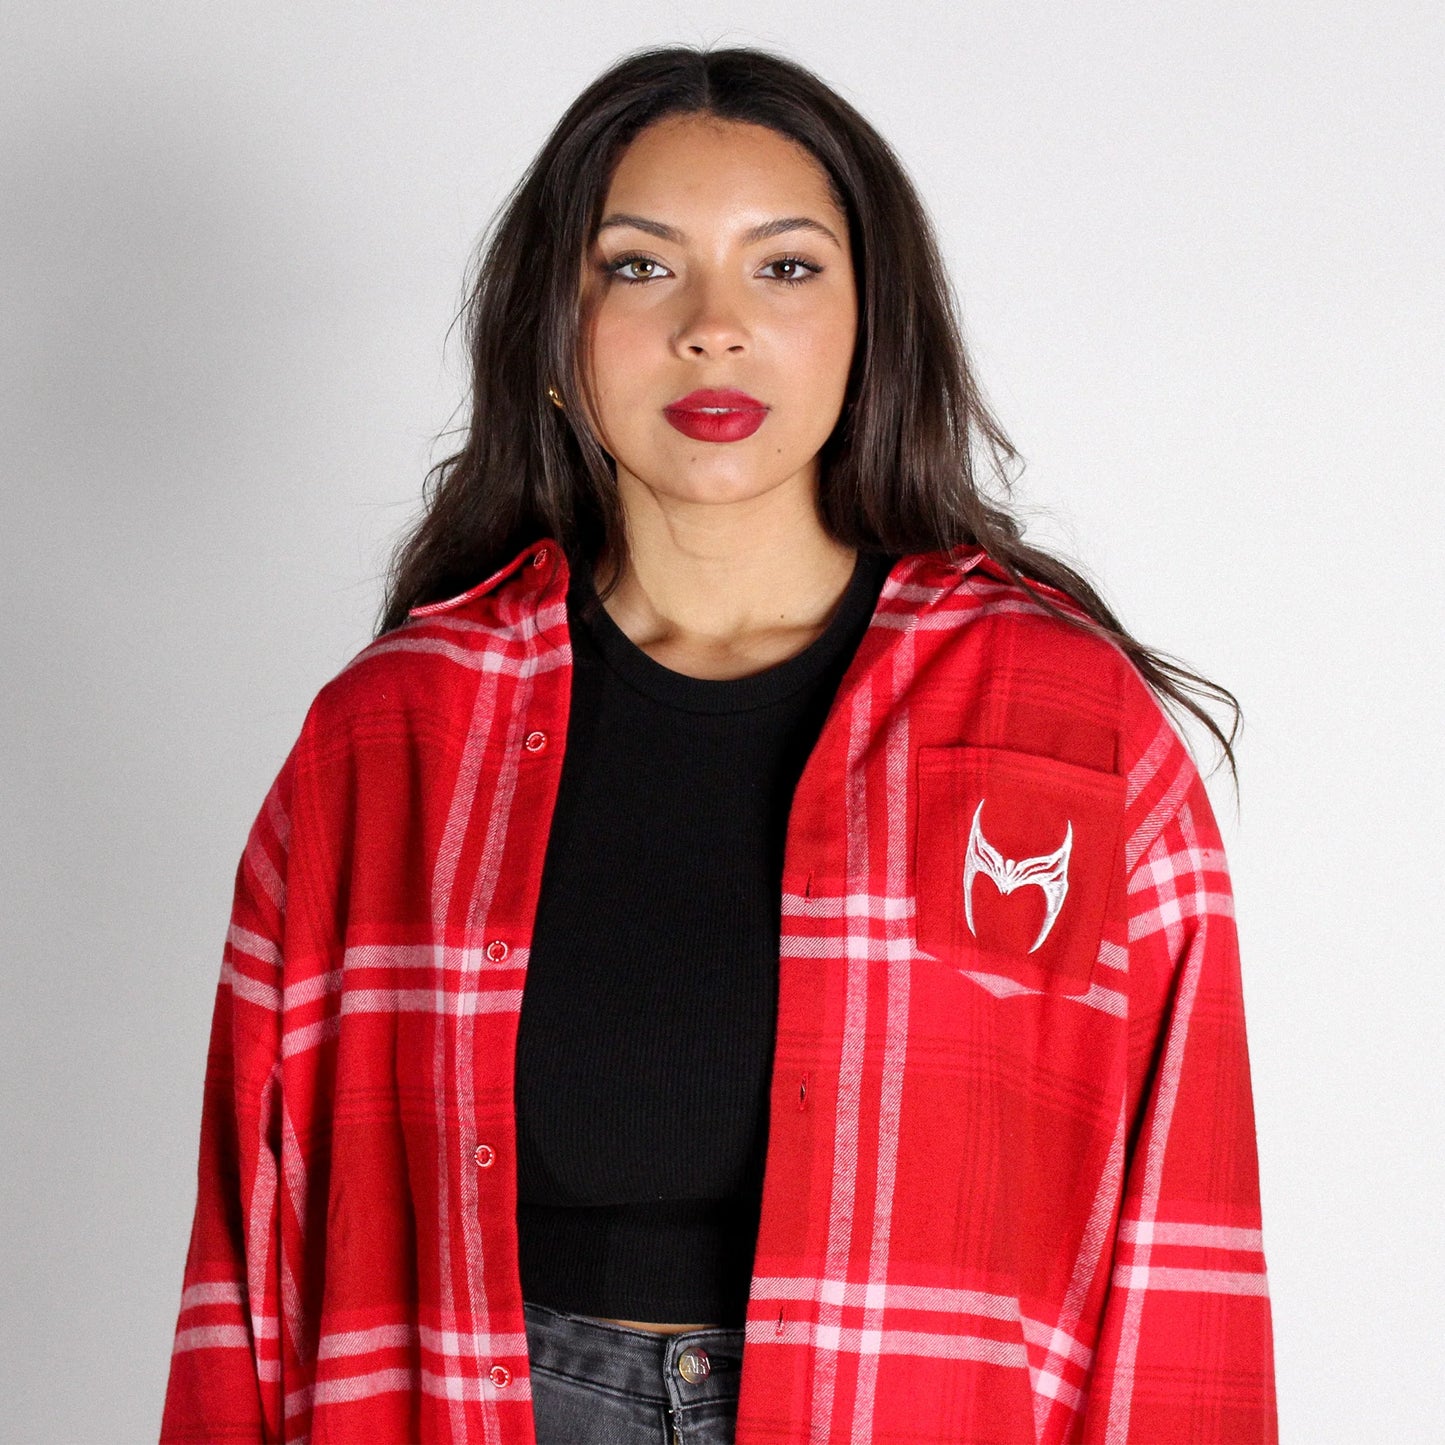 Scarlet Witch (Marvel) Flannel Shirt by Cakeworthy